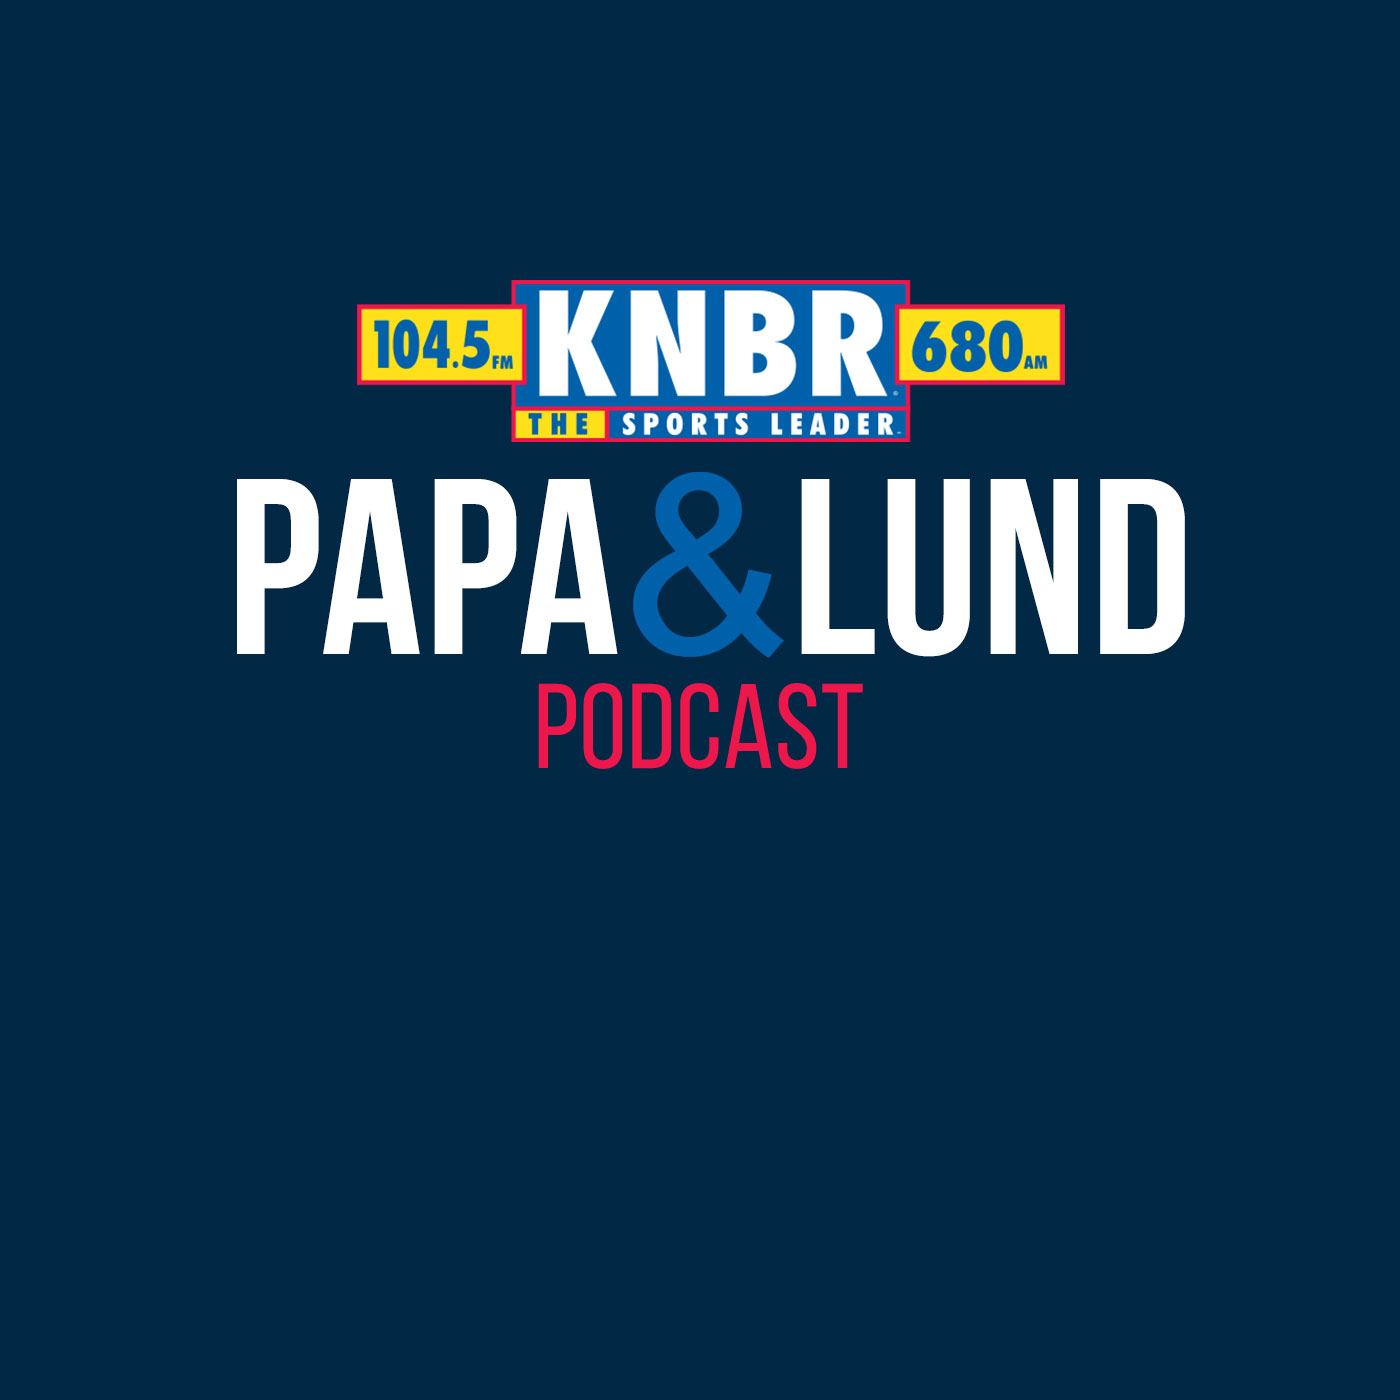 4-16 Gary Gerould joins Papa & Lund to discuss what the Kings can do to finally knock out the Warriors